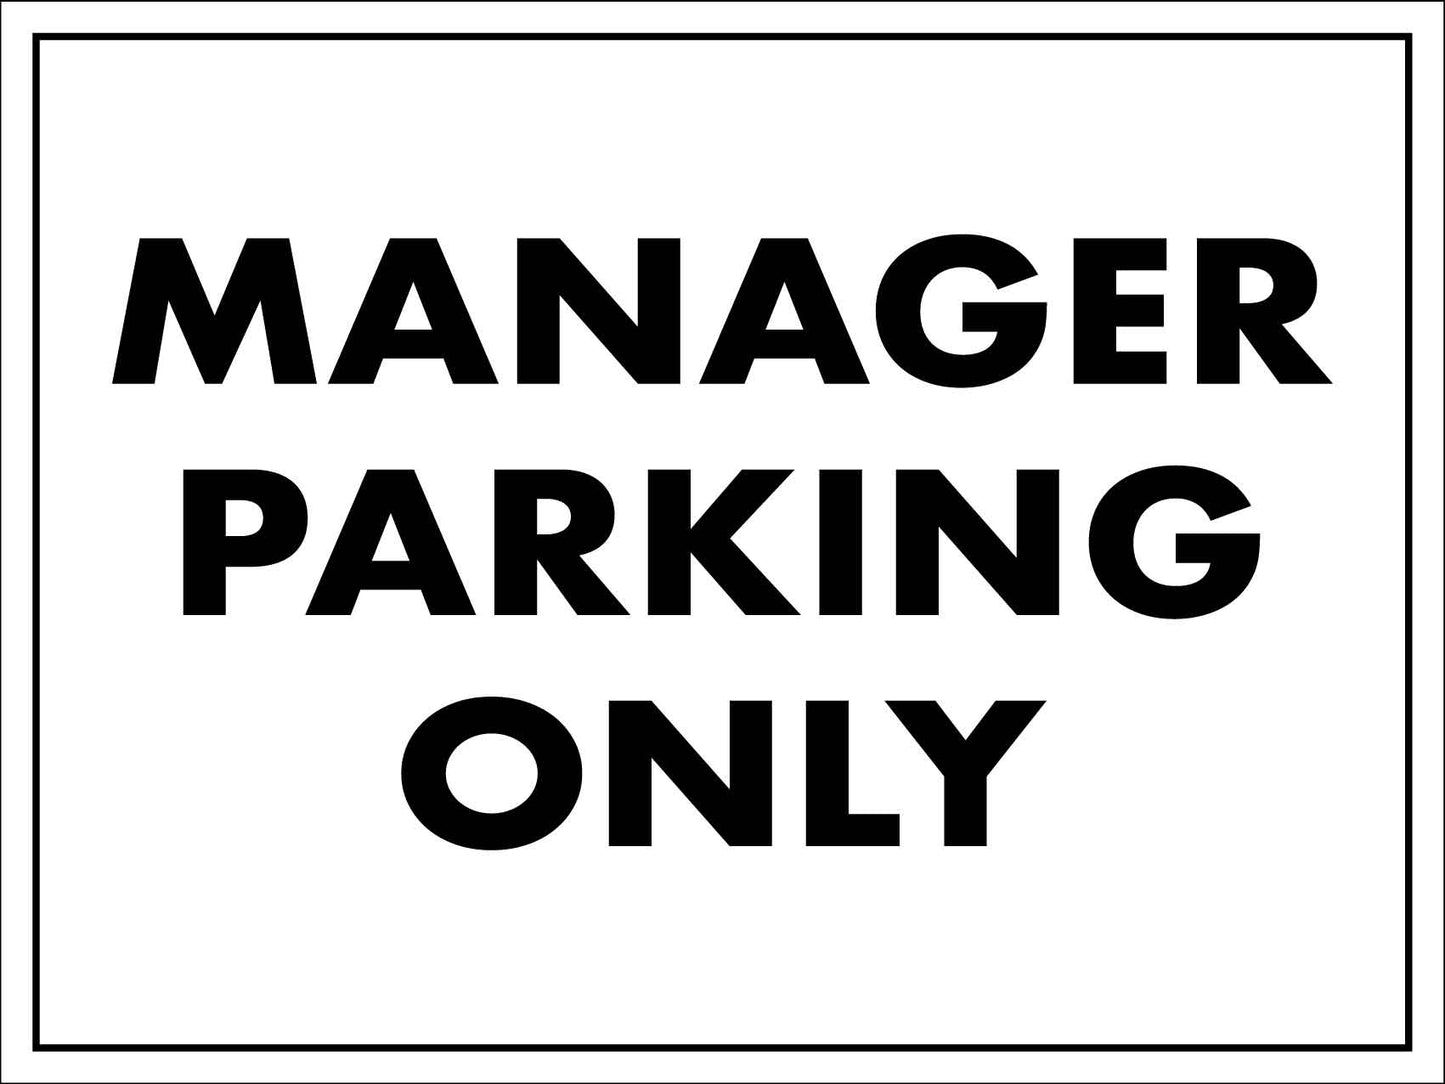 Manager Parking Only Sign